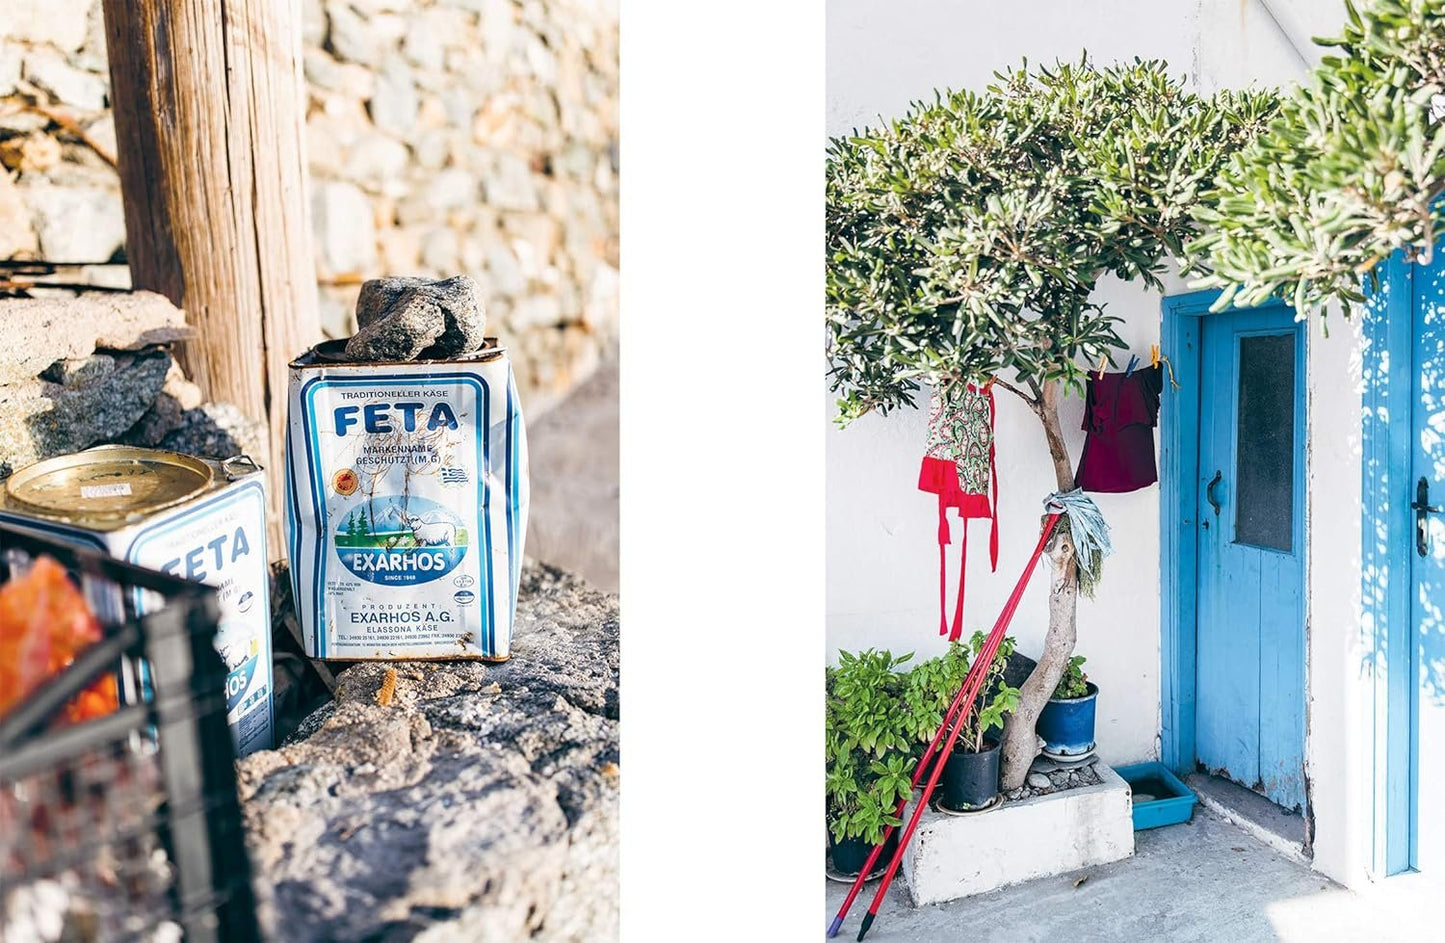 Ikaria: Food and life in the Blue Zone